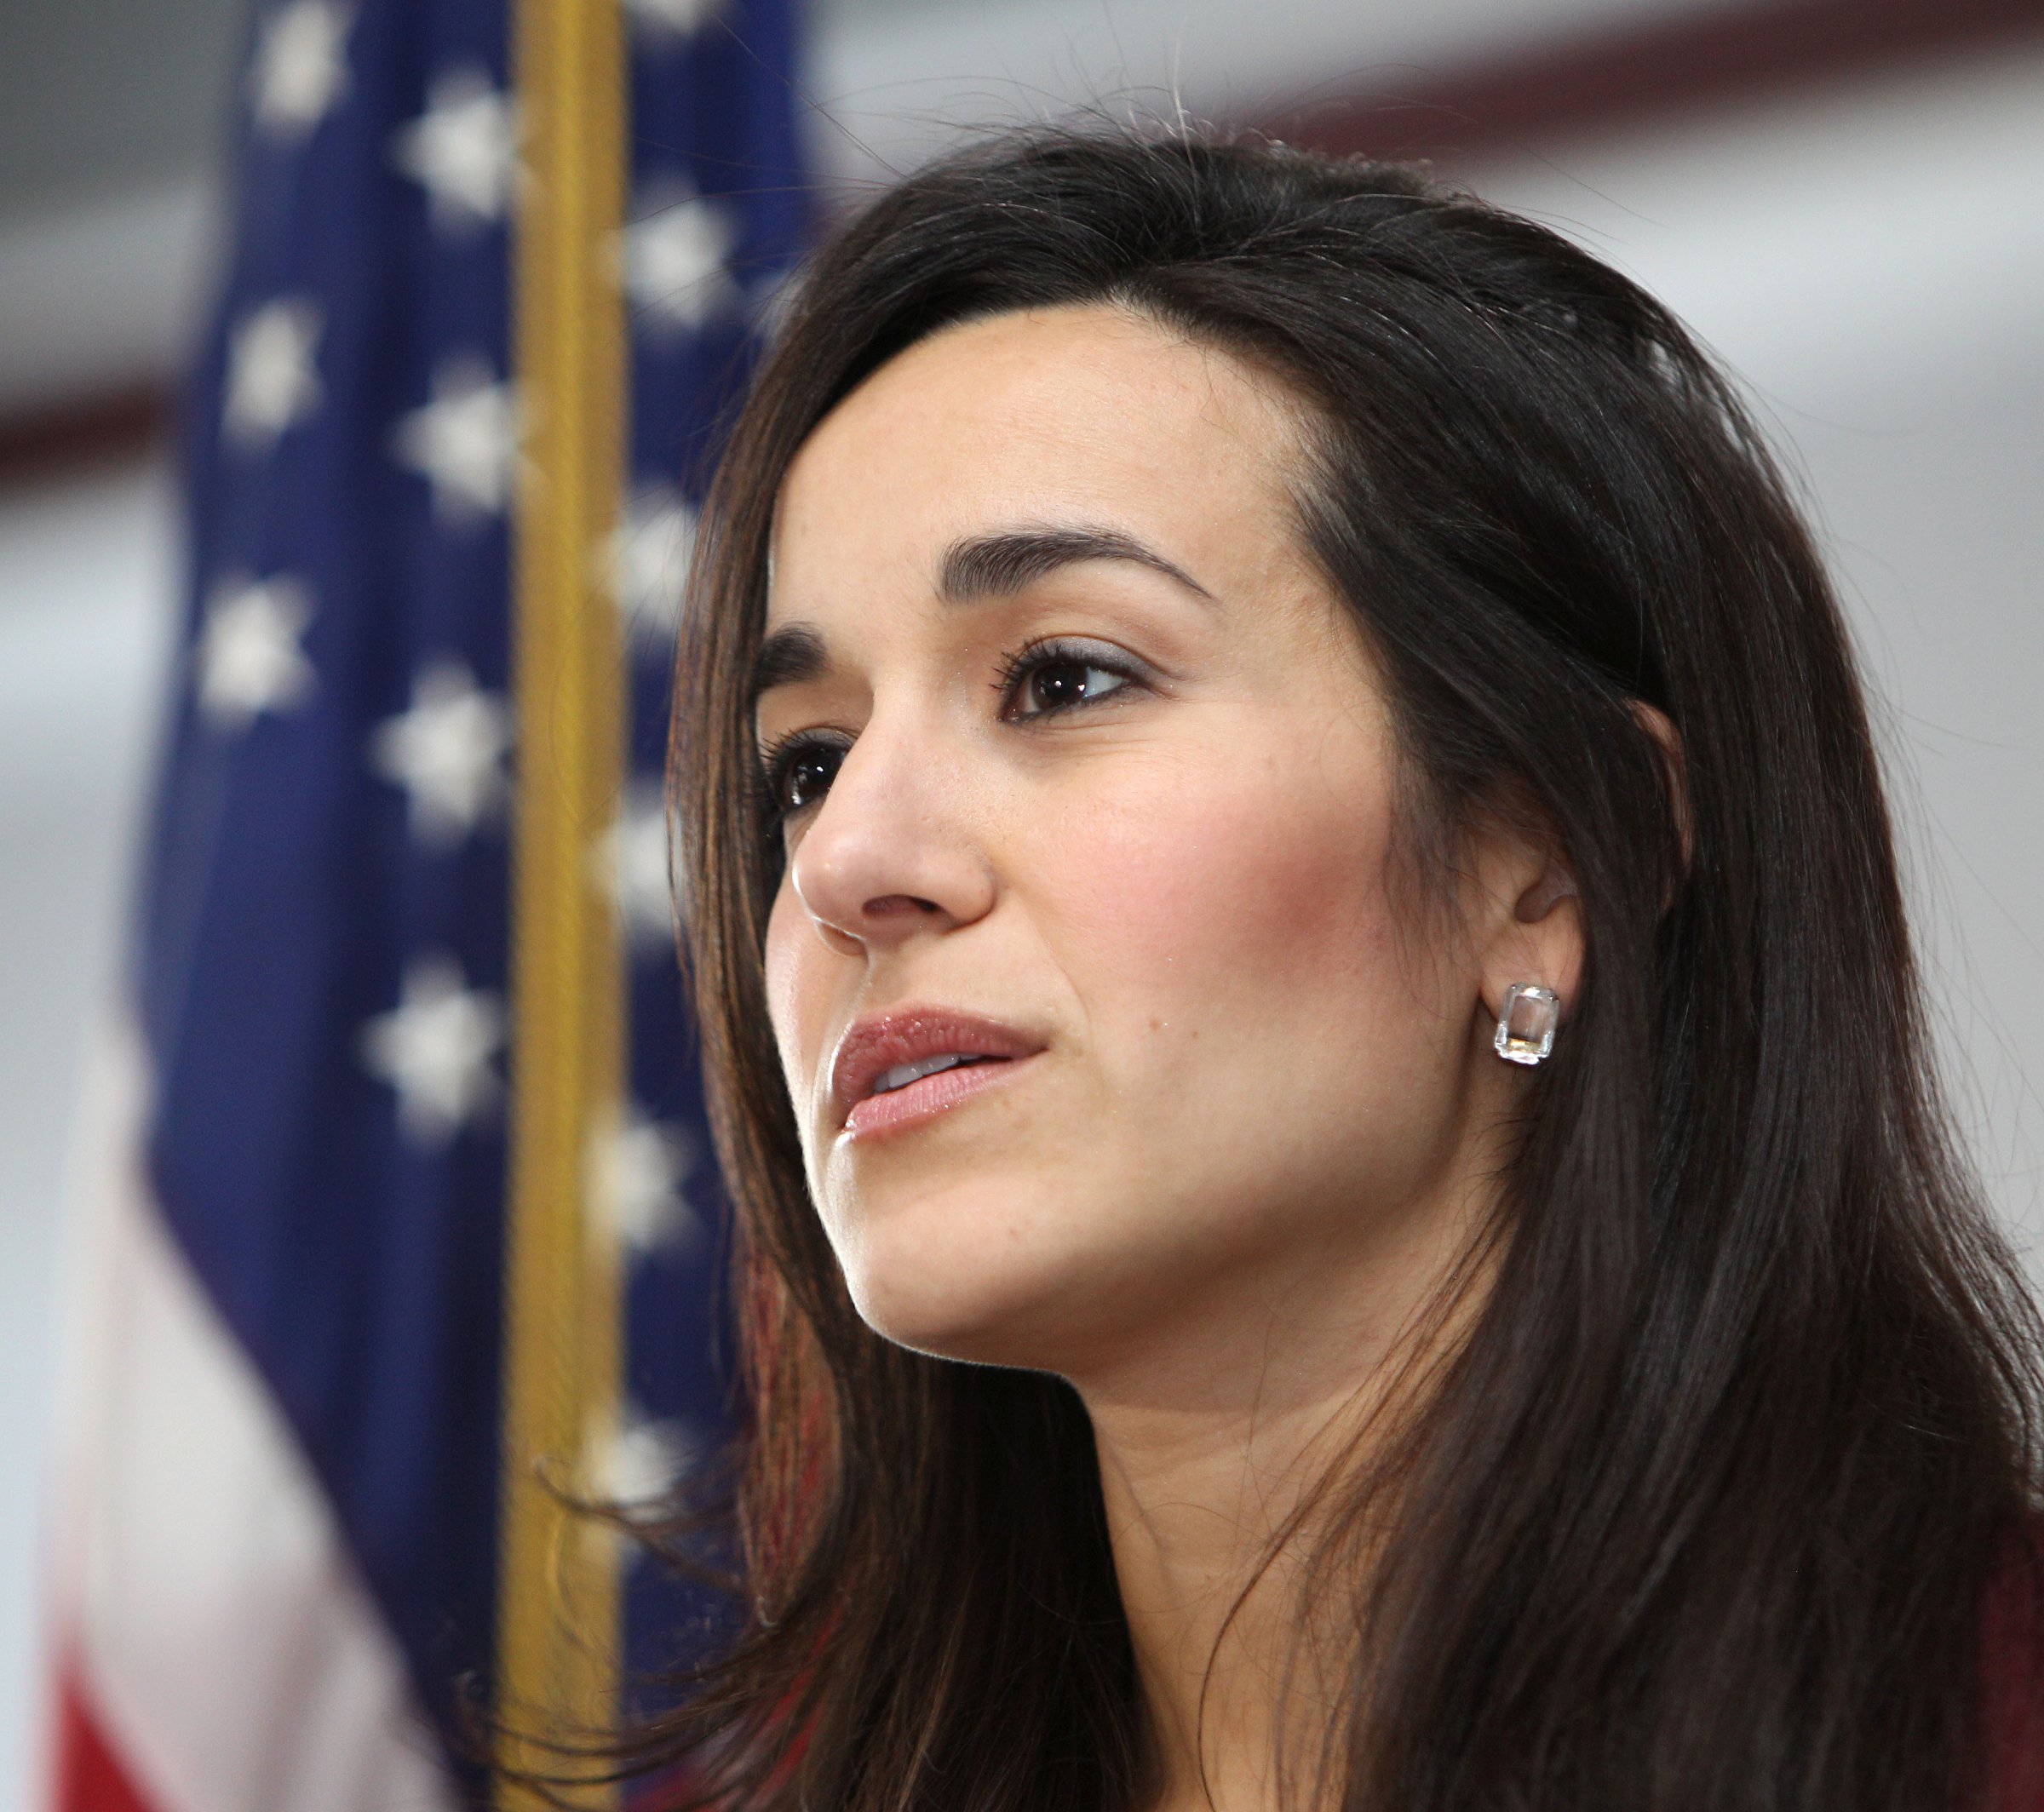 State Representative Marilinda Garcia announces her candidacy for New Hampshire's 2nd congressional district on Jan. 22, 2014 in Concord, N.H.